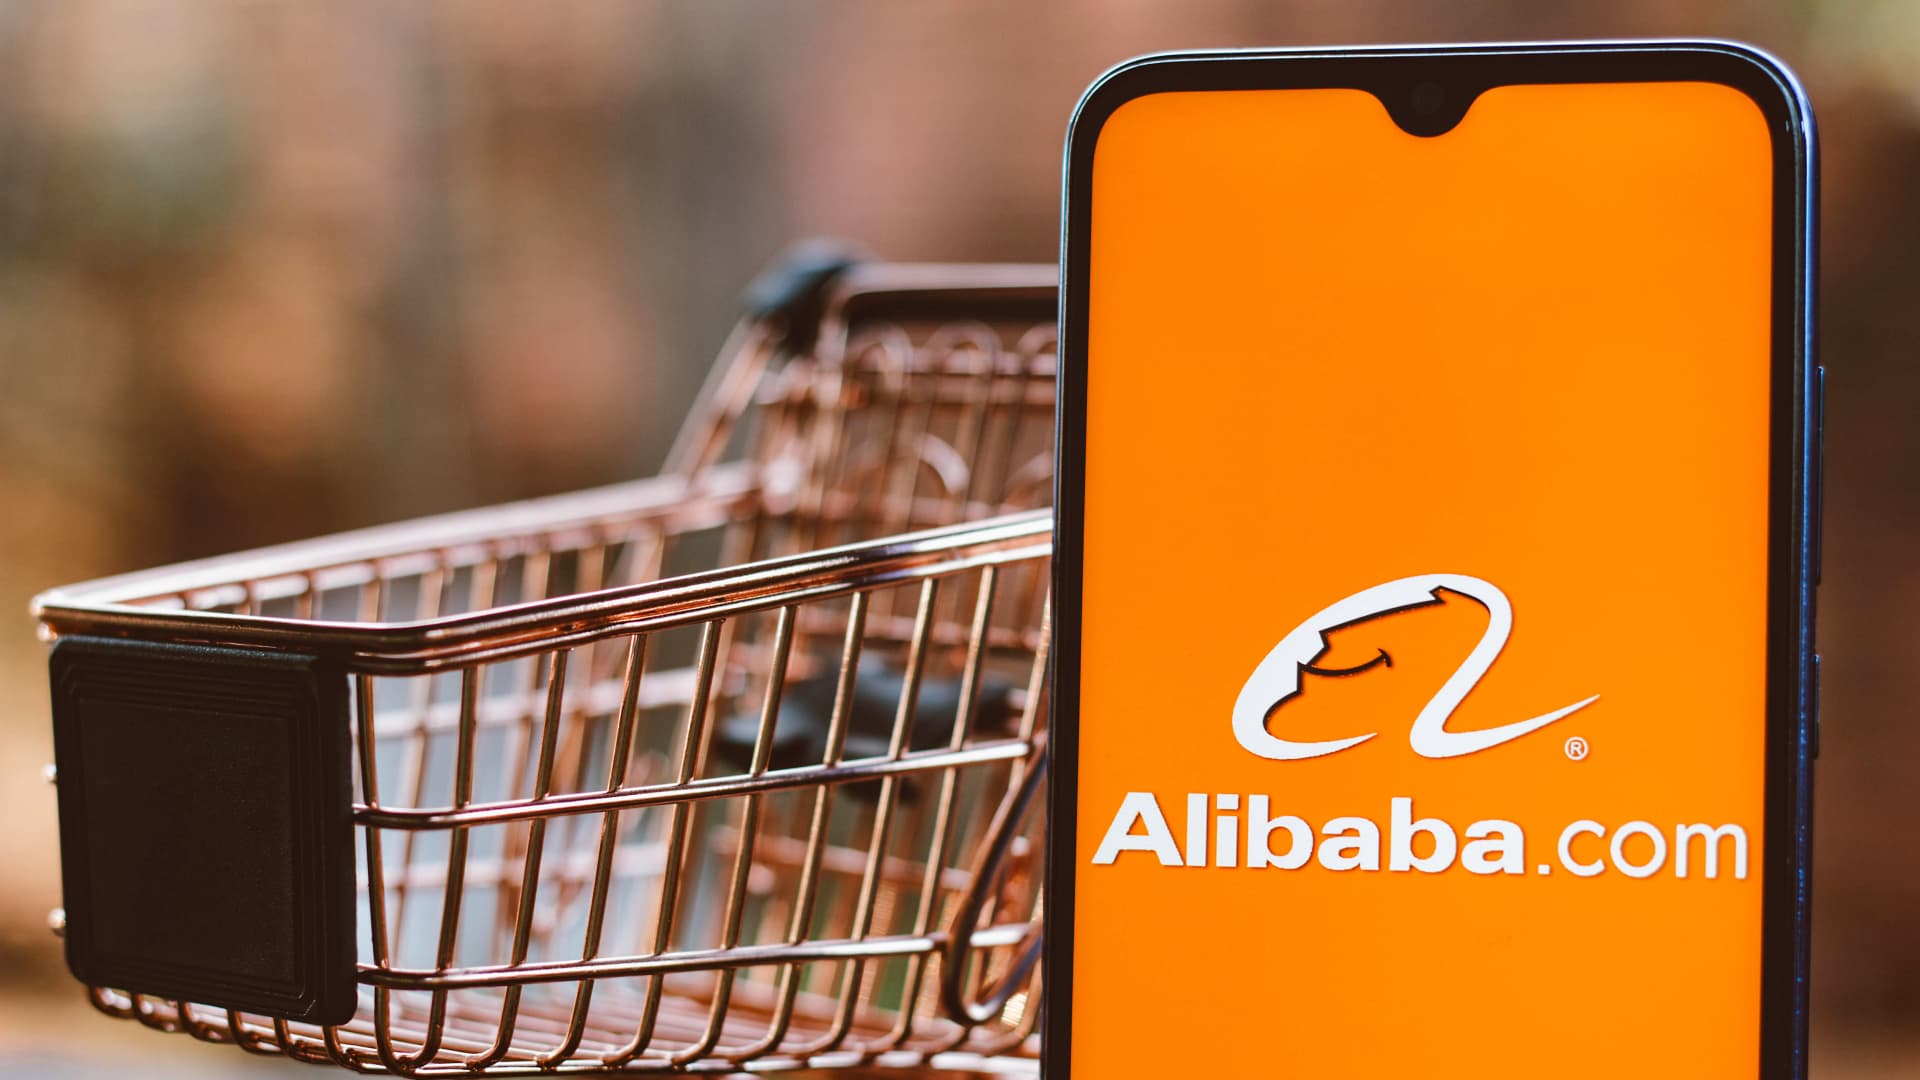 Analysts name 4 alternatives to Alibaba in China's tech sector - CNBC